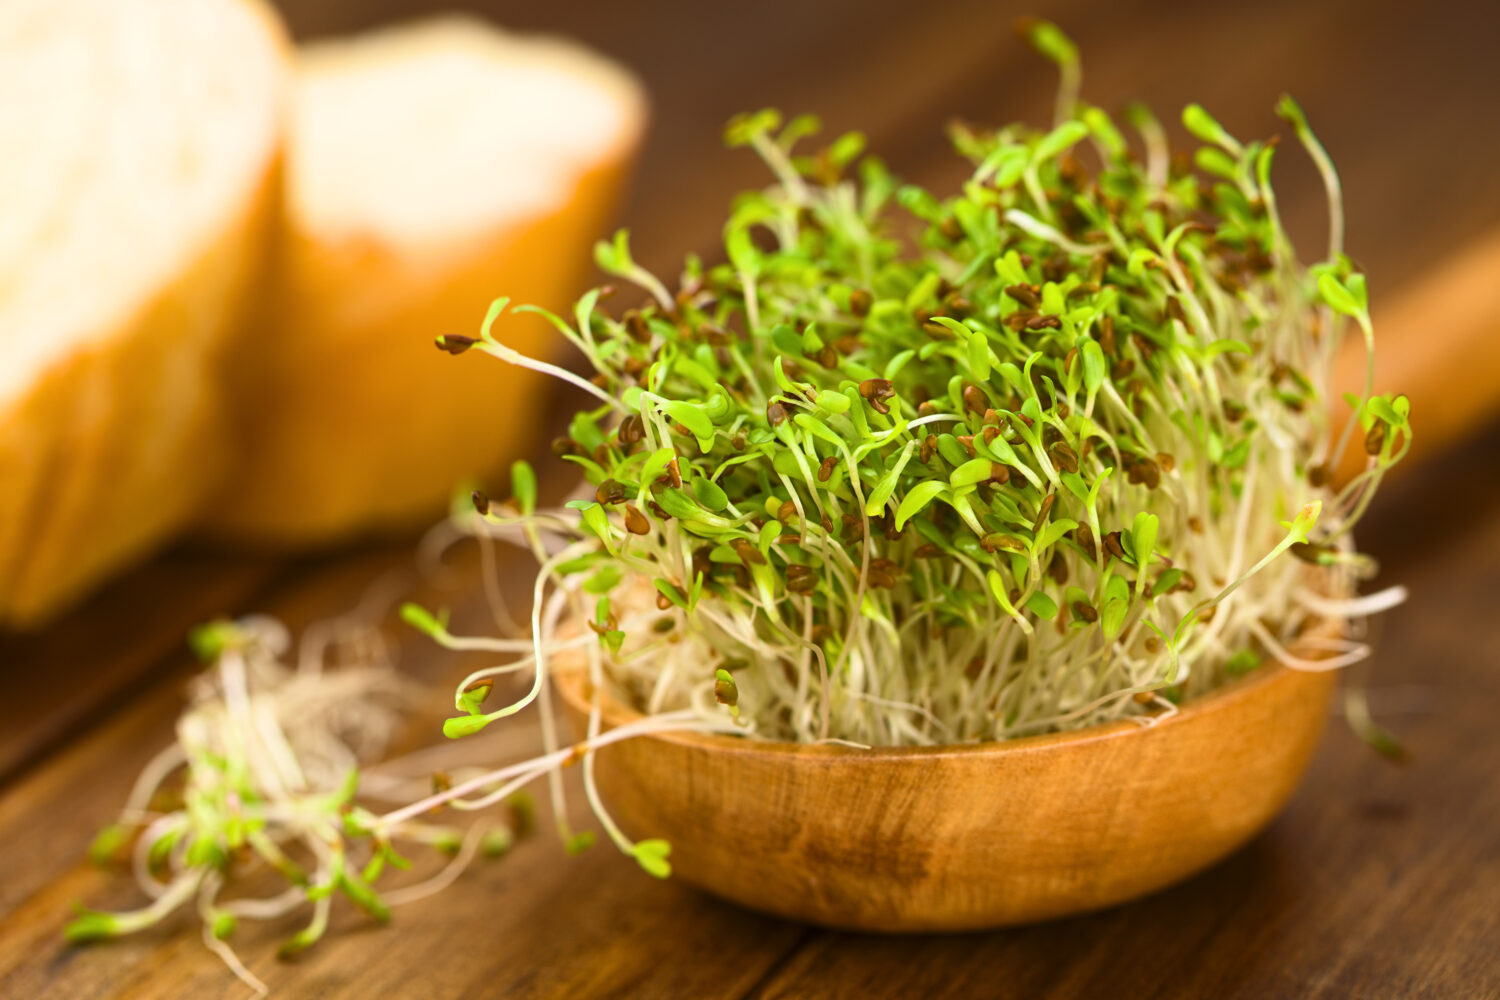 Sprouted alfalfa seeds on wooden spoon (Very Shallow Depth of Field, Focus on sprouts in the front)